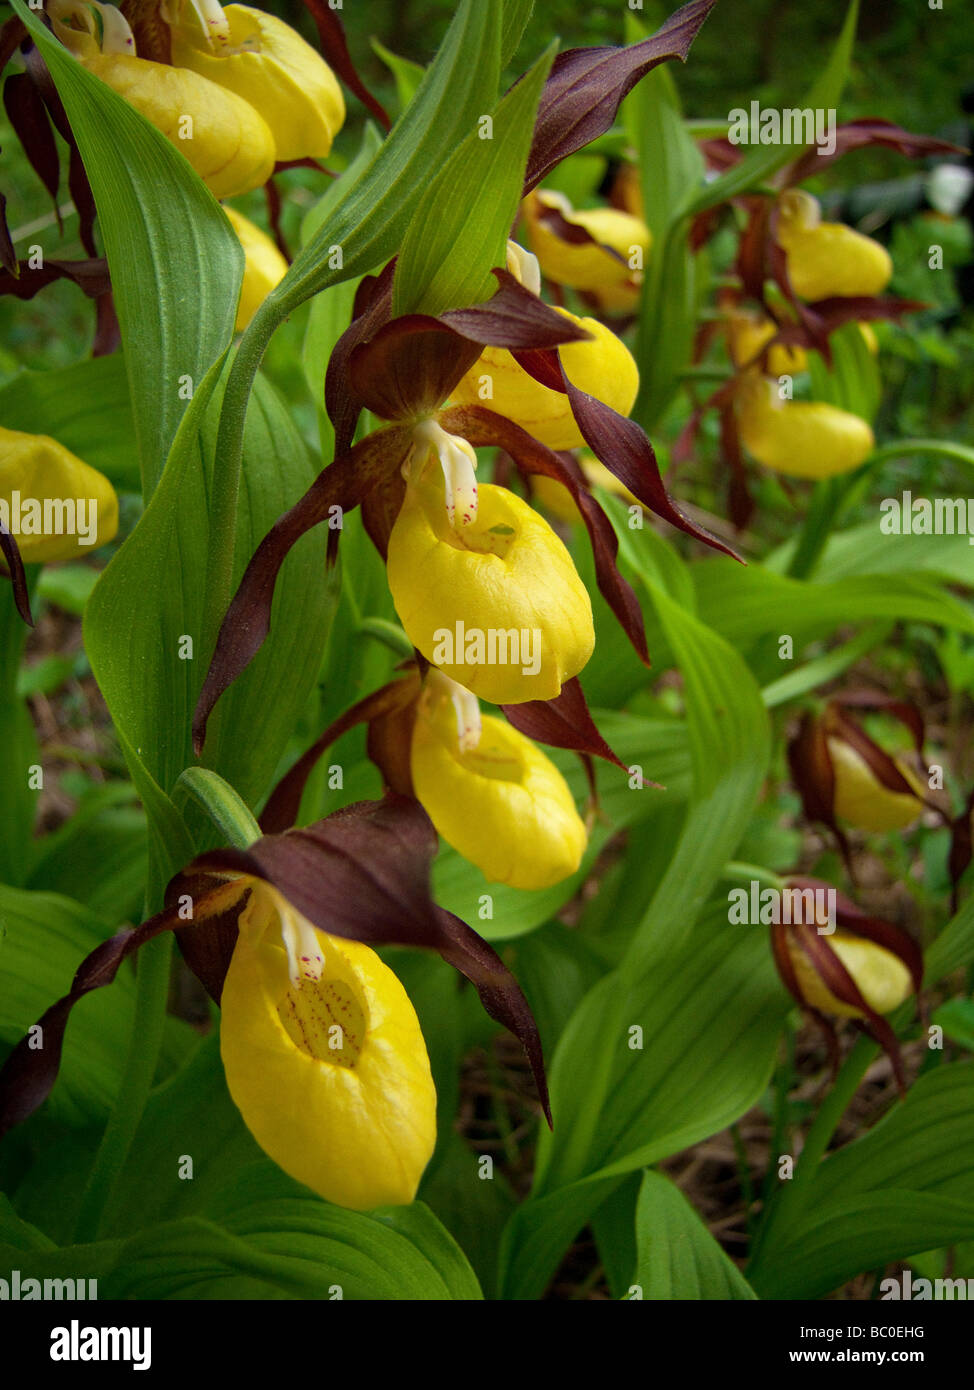 Share more than 80 pictures of lady slippers latest